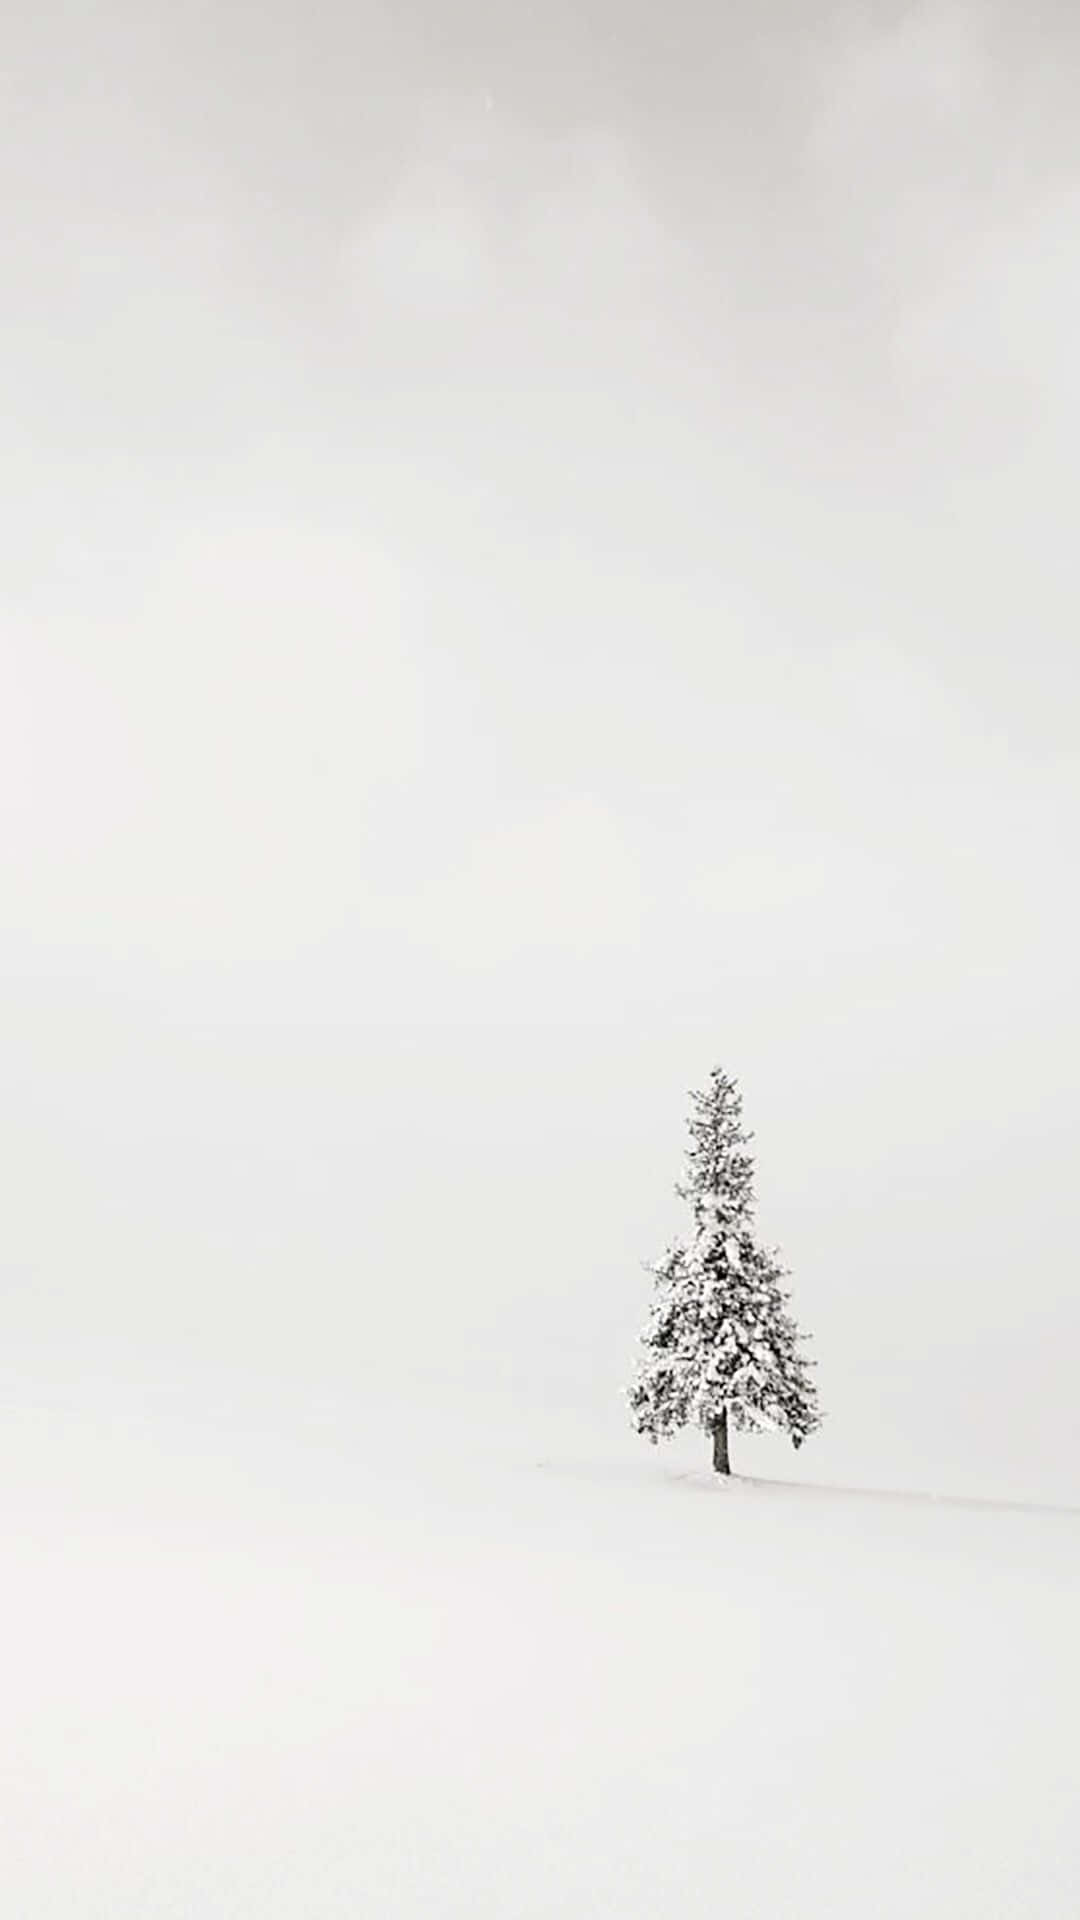 A Single Tree In A Snow Covered Field